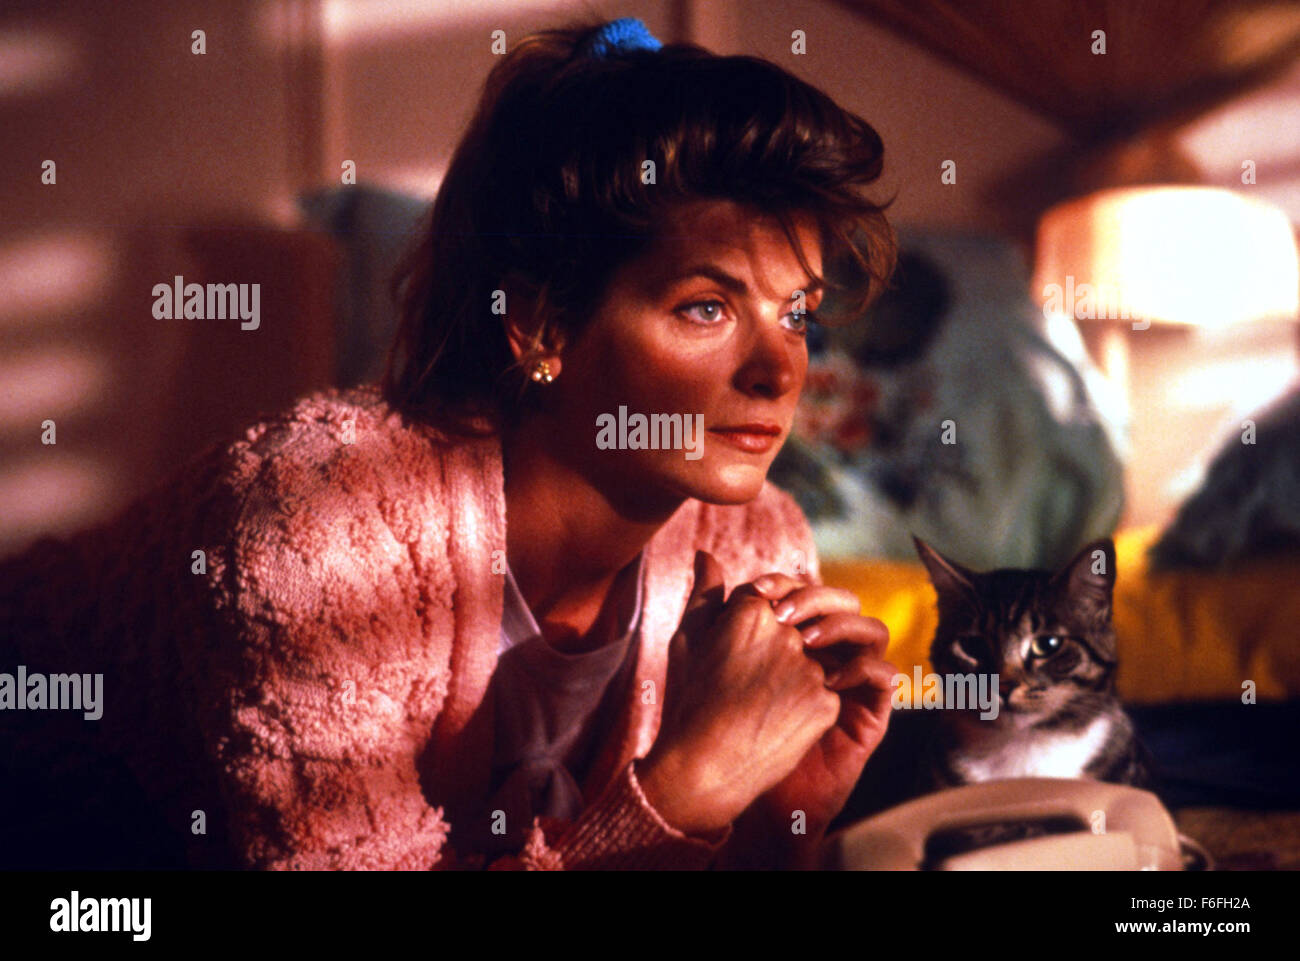 Aug 12, 1989; Hollywood, CA, USA; KIRSTIE ALLEY stars as Mollie in the romantic comedy 'Look Who's Talking' directed by Amy Heckerling Stock Photo